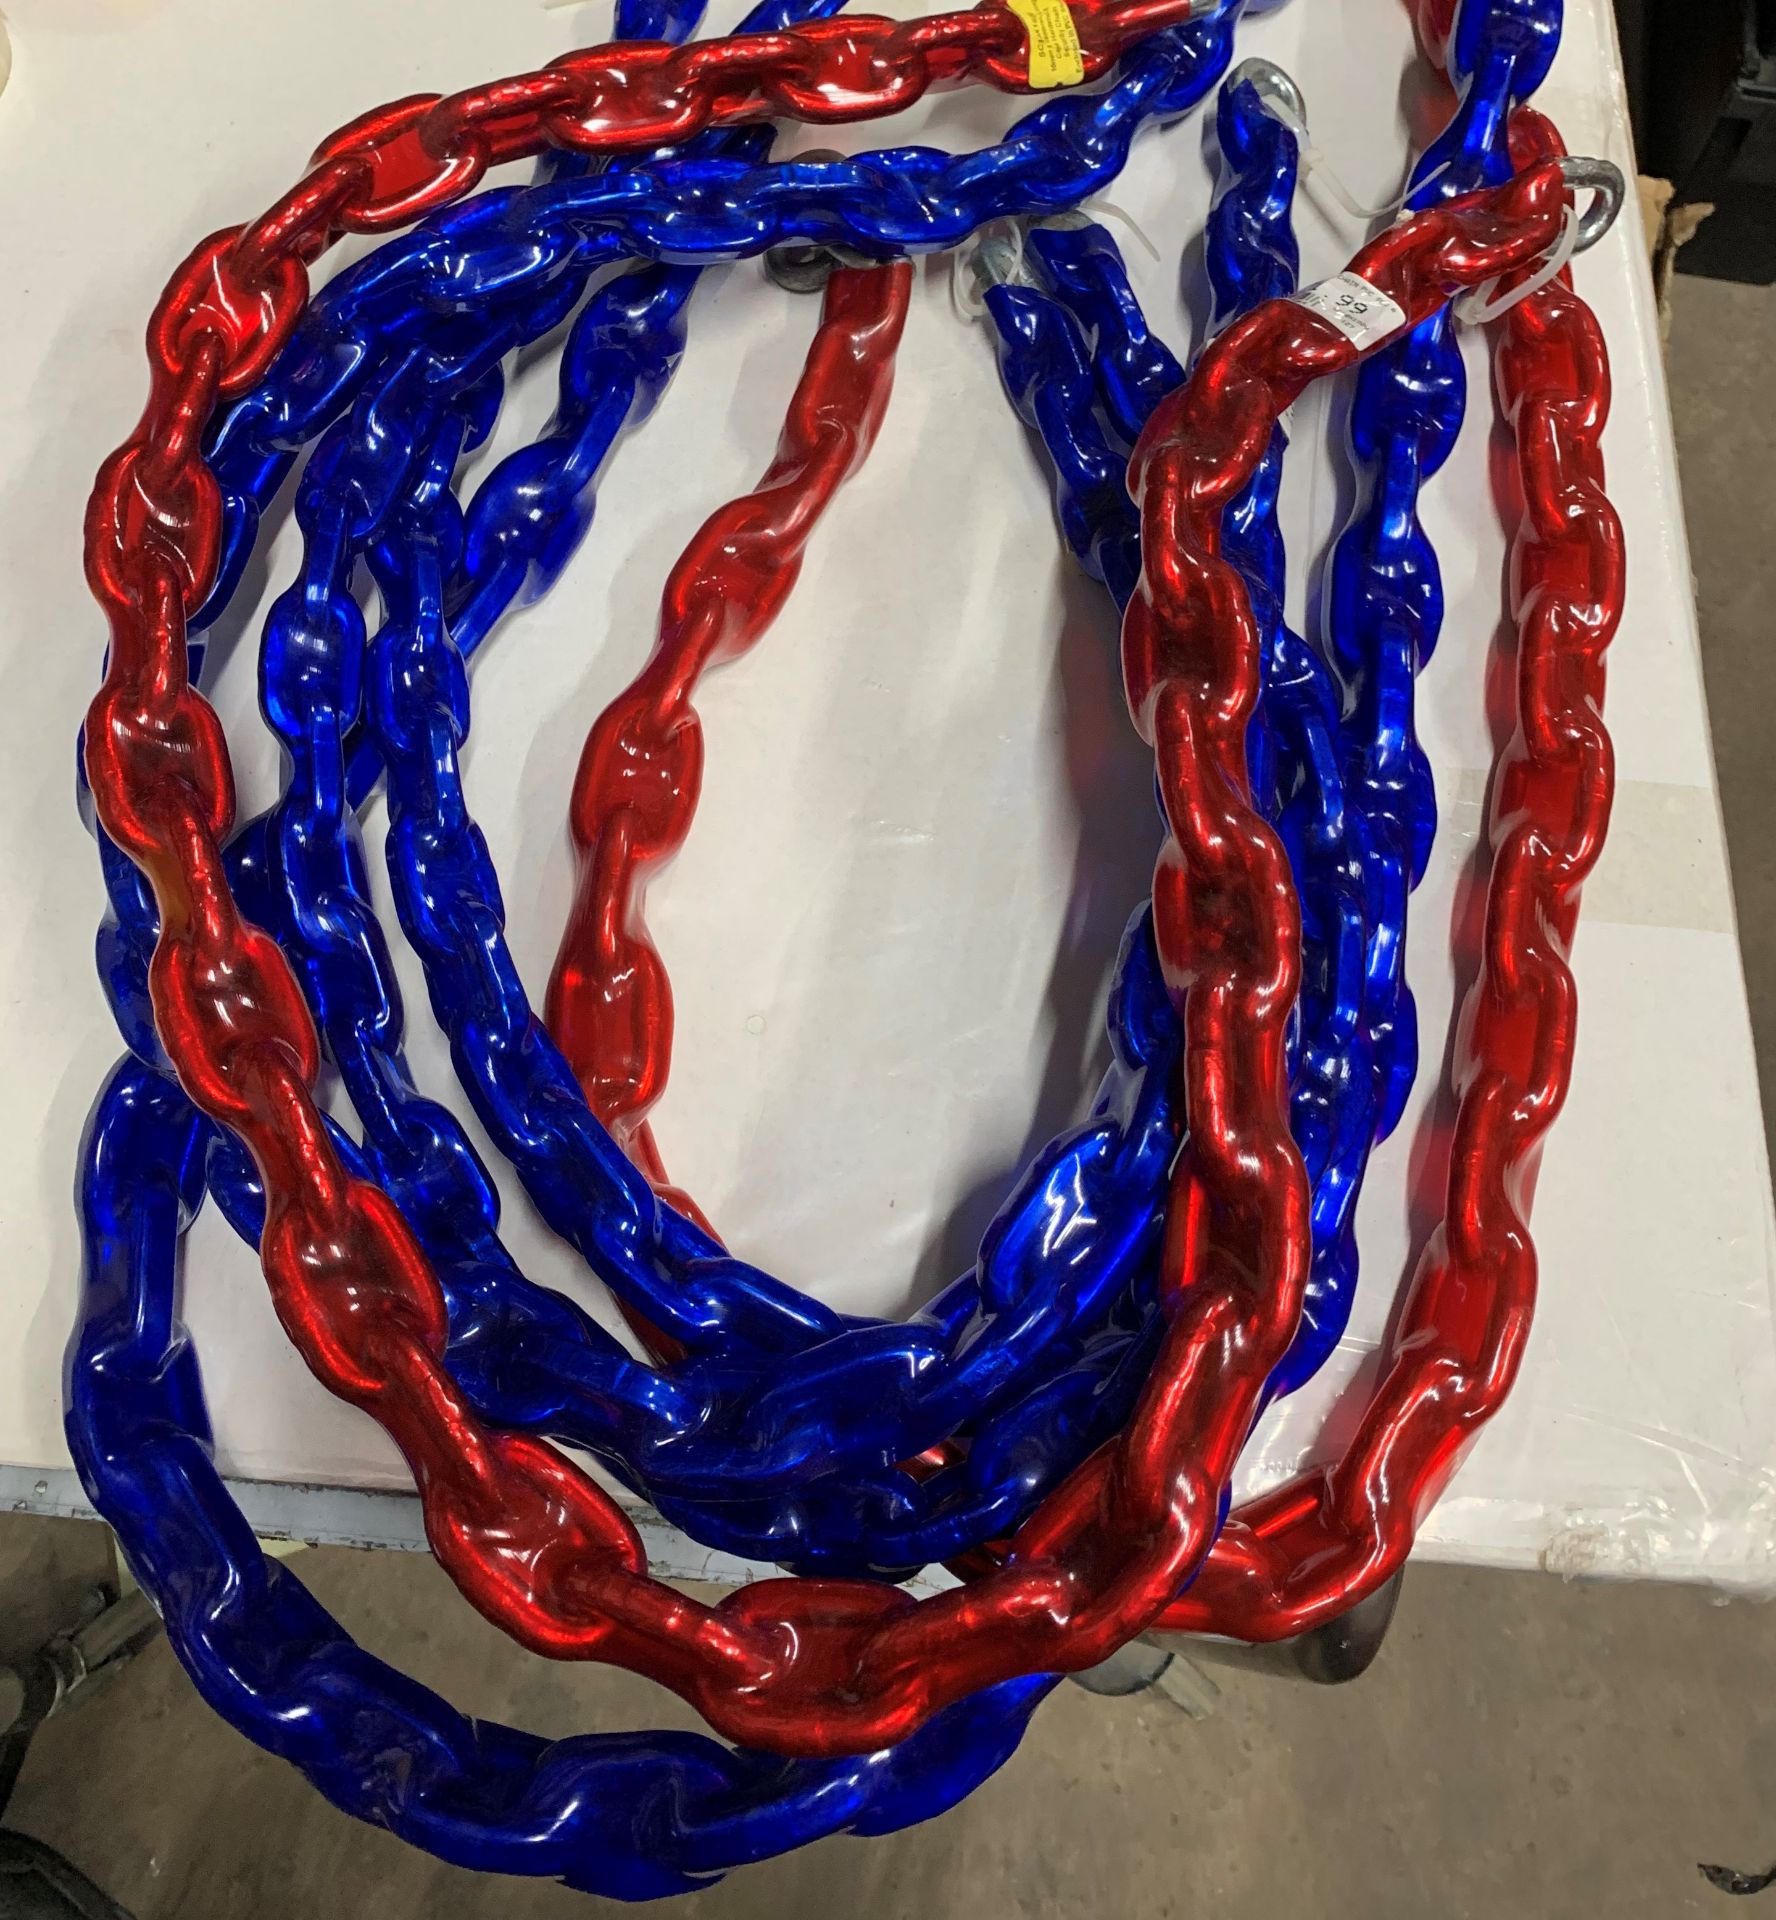 6 x Heavy duty security chains